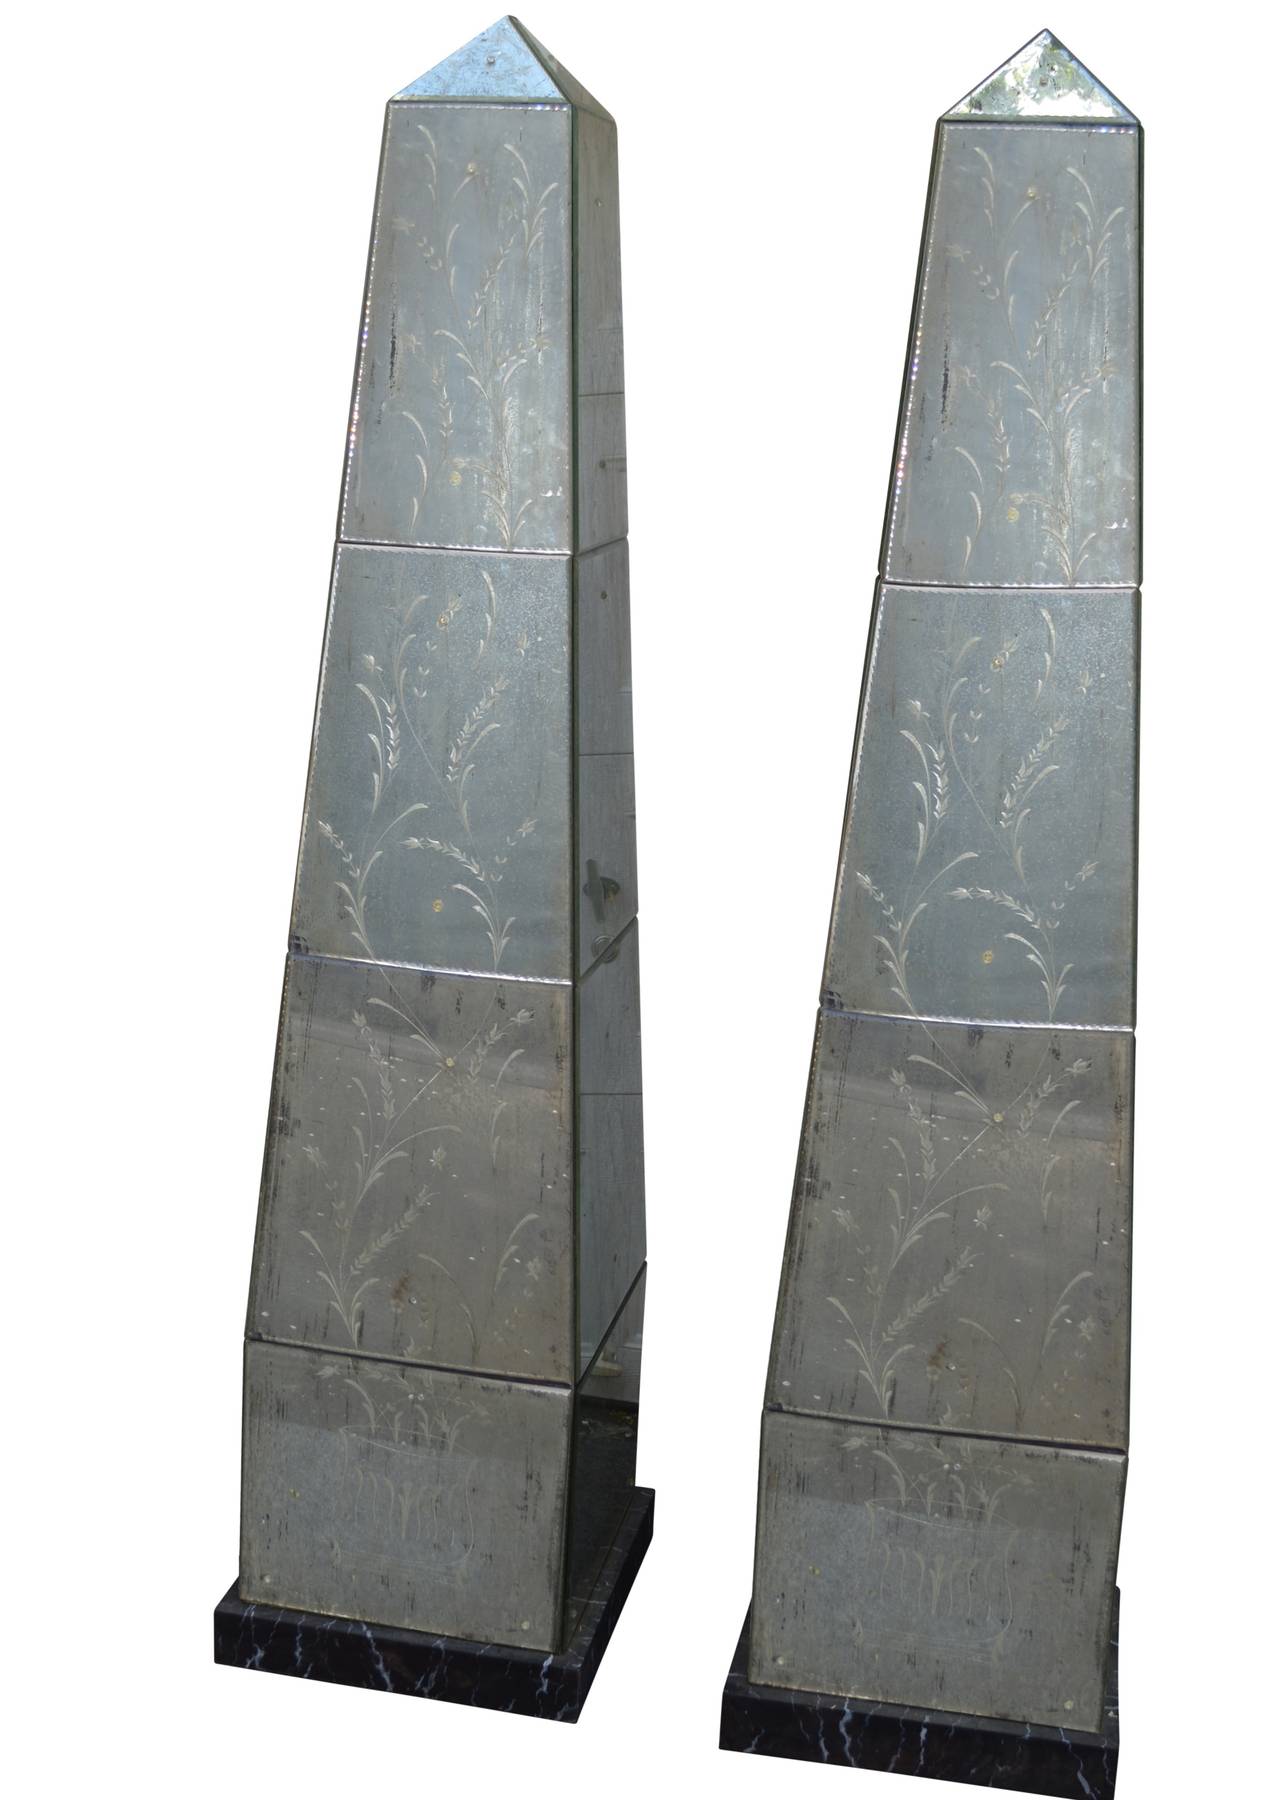 A stunning pair of Venetian-style mirror-glass obelisks on faux marbeled wooden base. 

Glass has simple flower decorations etched in Murano style on each foliated glass pane.

Designed by American designer couple and made in Italy.

See 2007